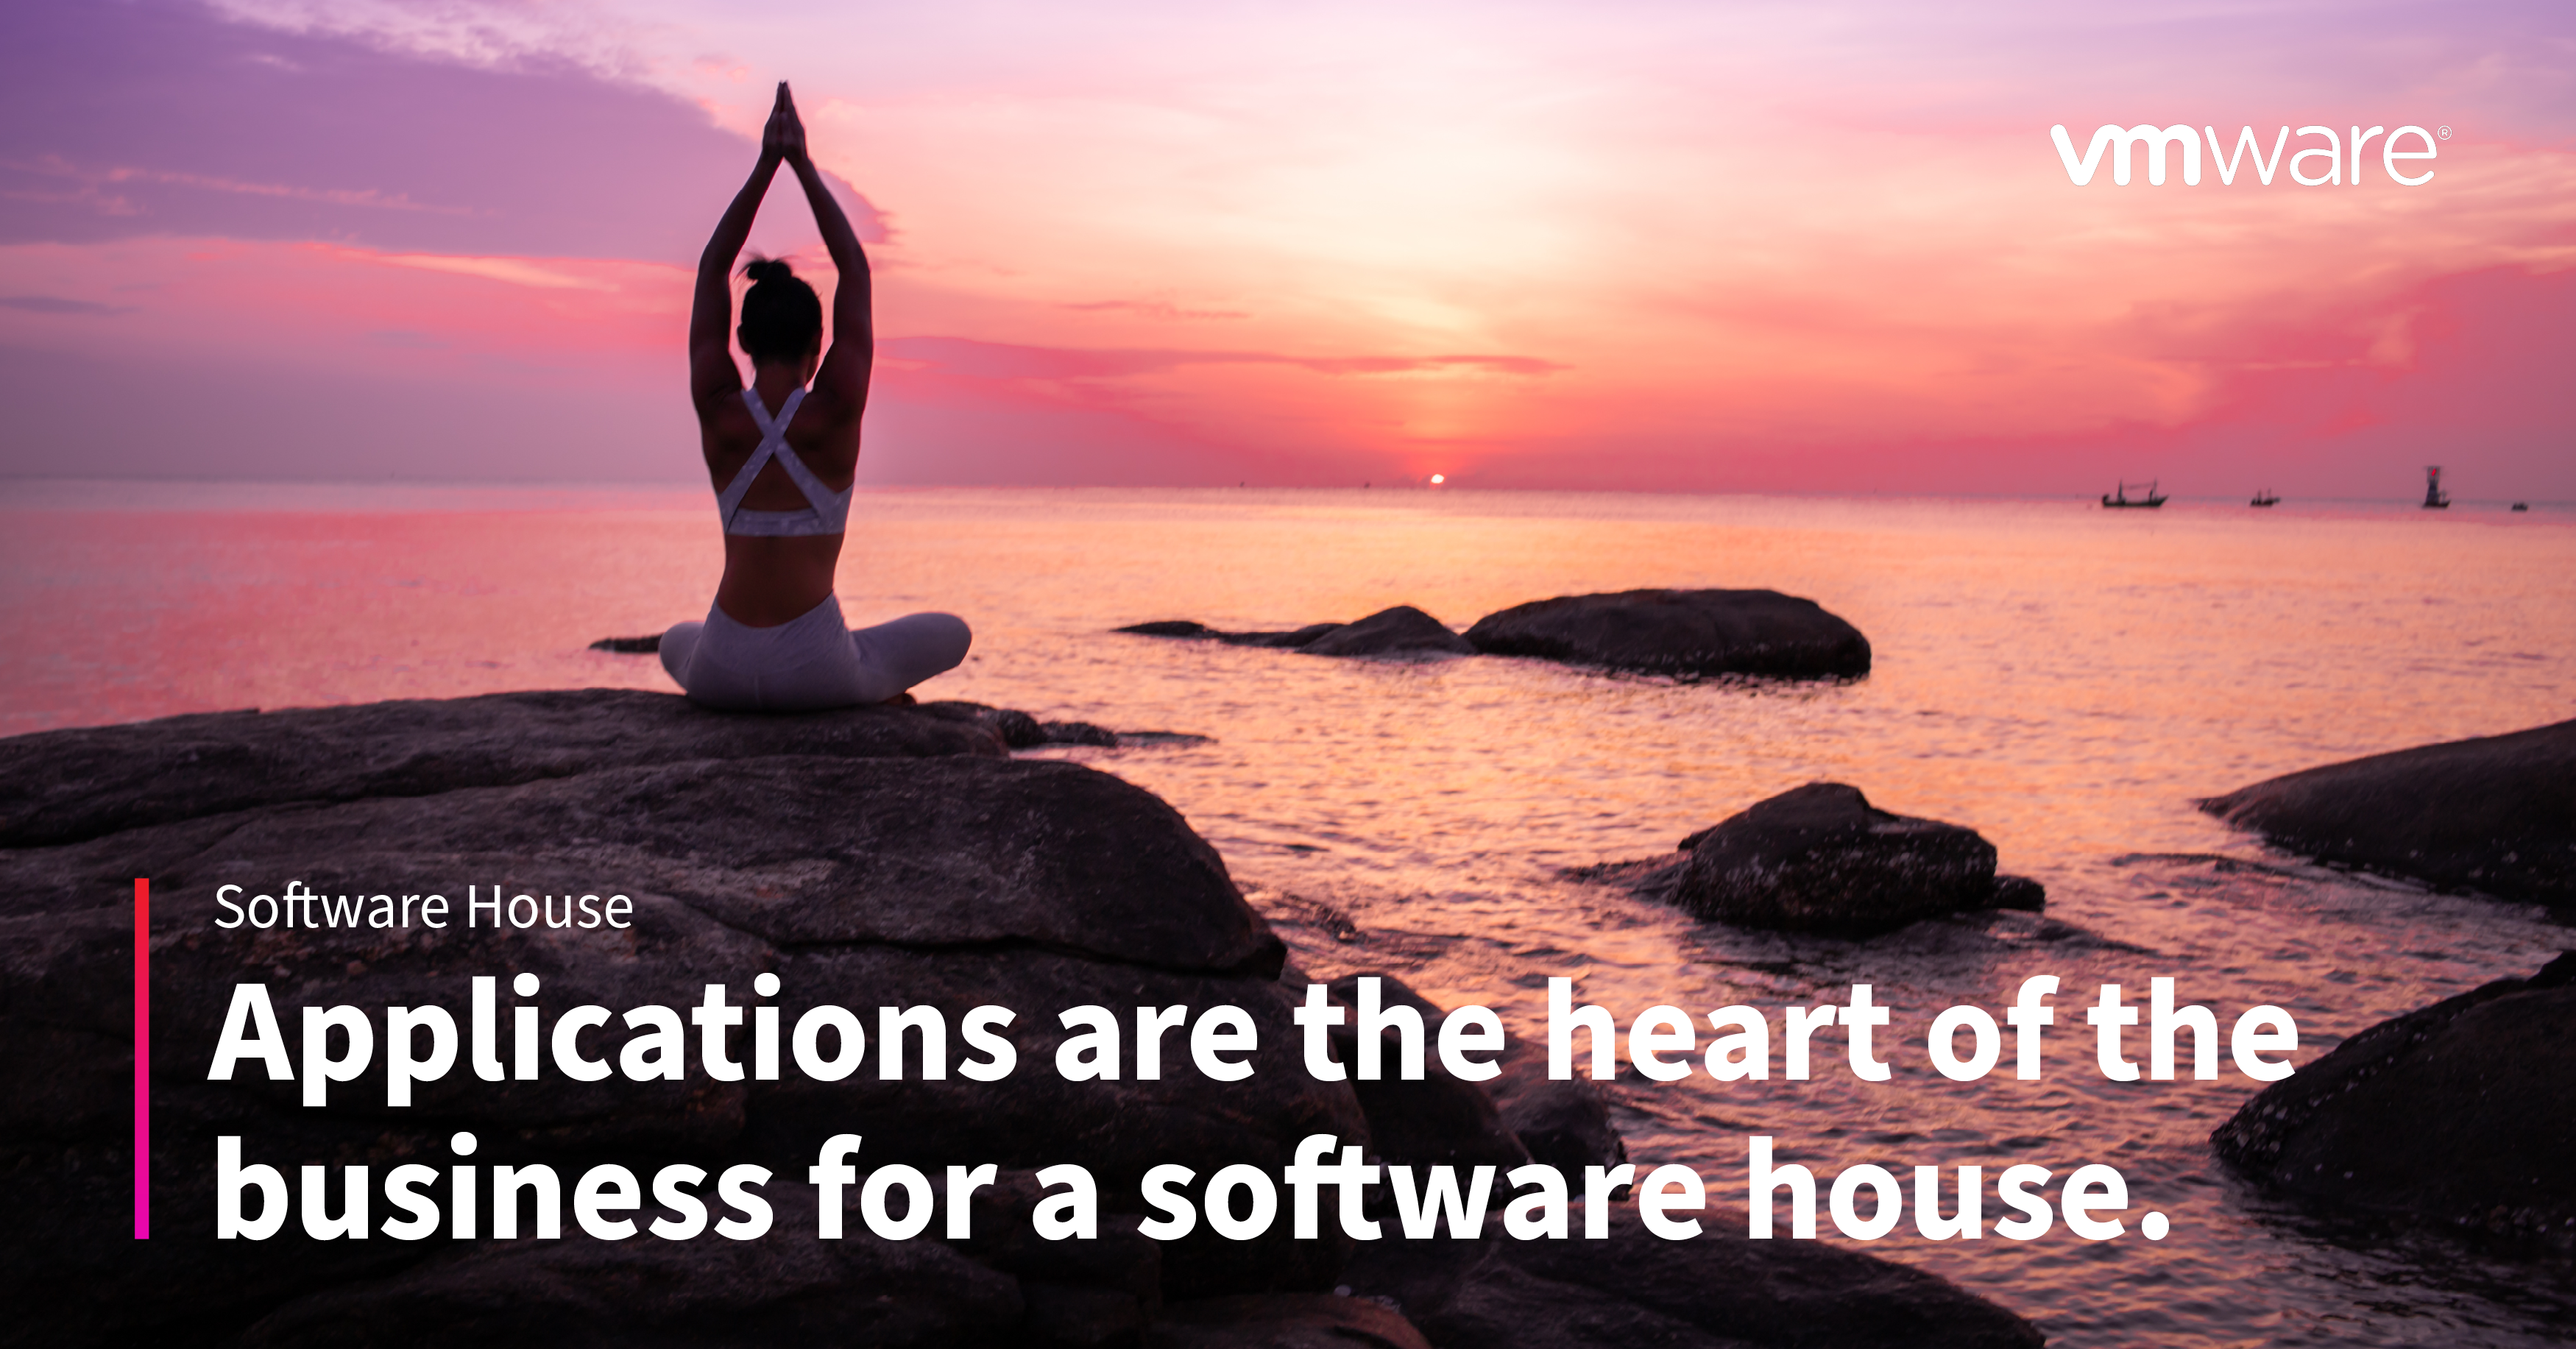 Applications are the heart of the business for a software house